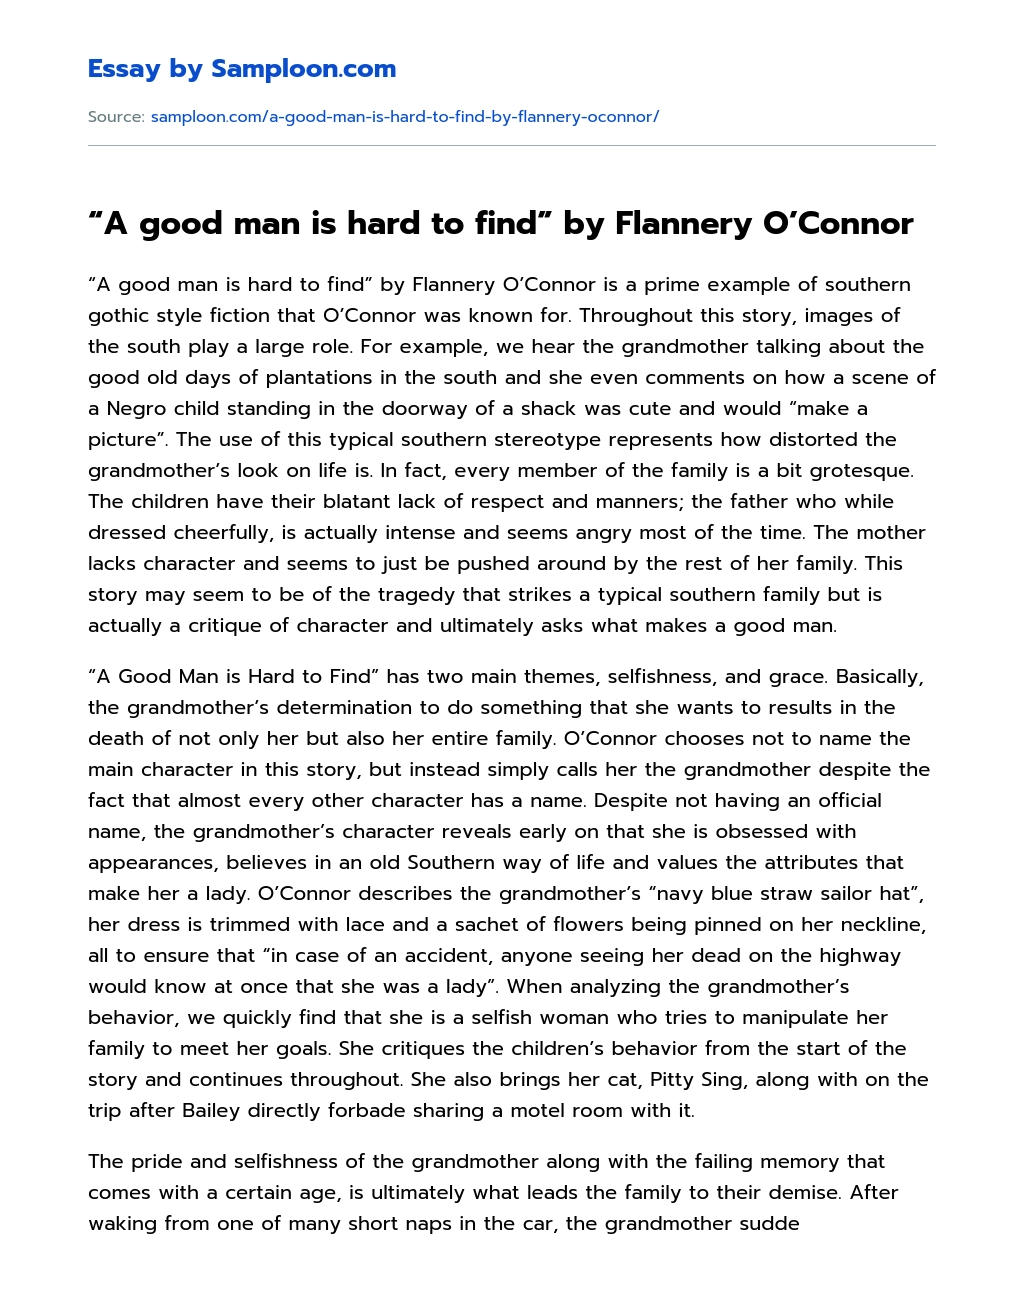 “A good man is hard to find” by Flannery O’Connor essay